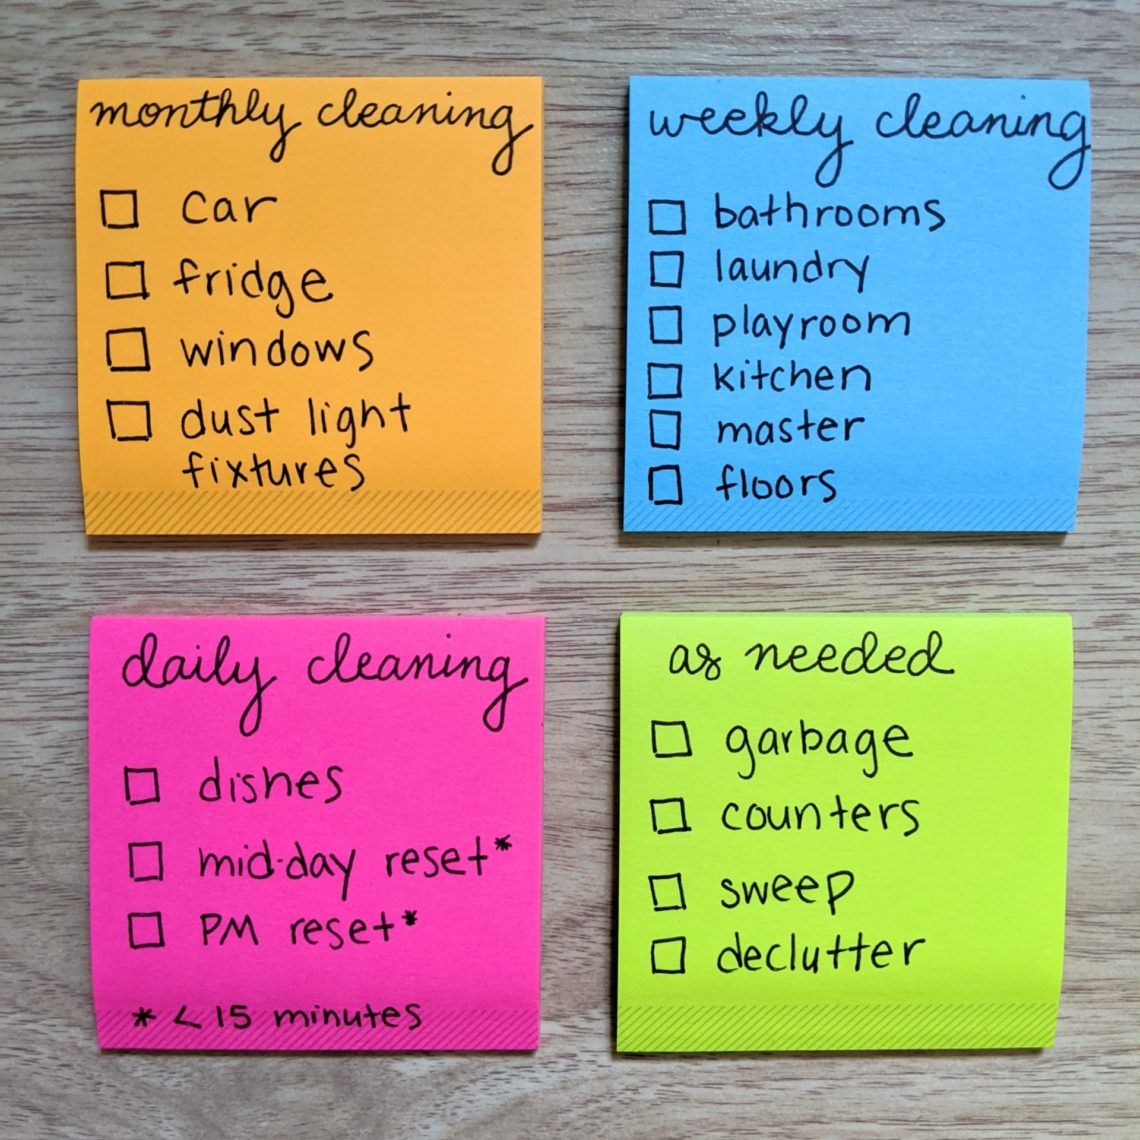 A cleaning schedule for people who hate cleaning (like me!). A flexible cleaning routine that is perfect for stay at home moms, working moms or anyone who doesn't want to spend hours cleaning! #cleaningschedule #workingmom #stayathomemom #flexible #easy #simple